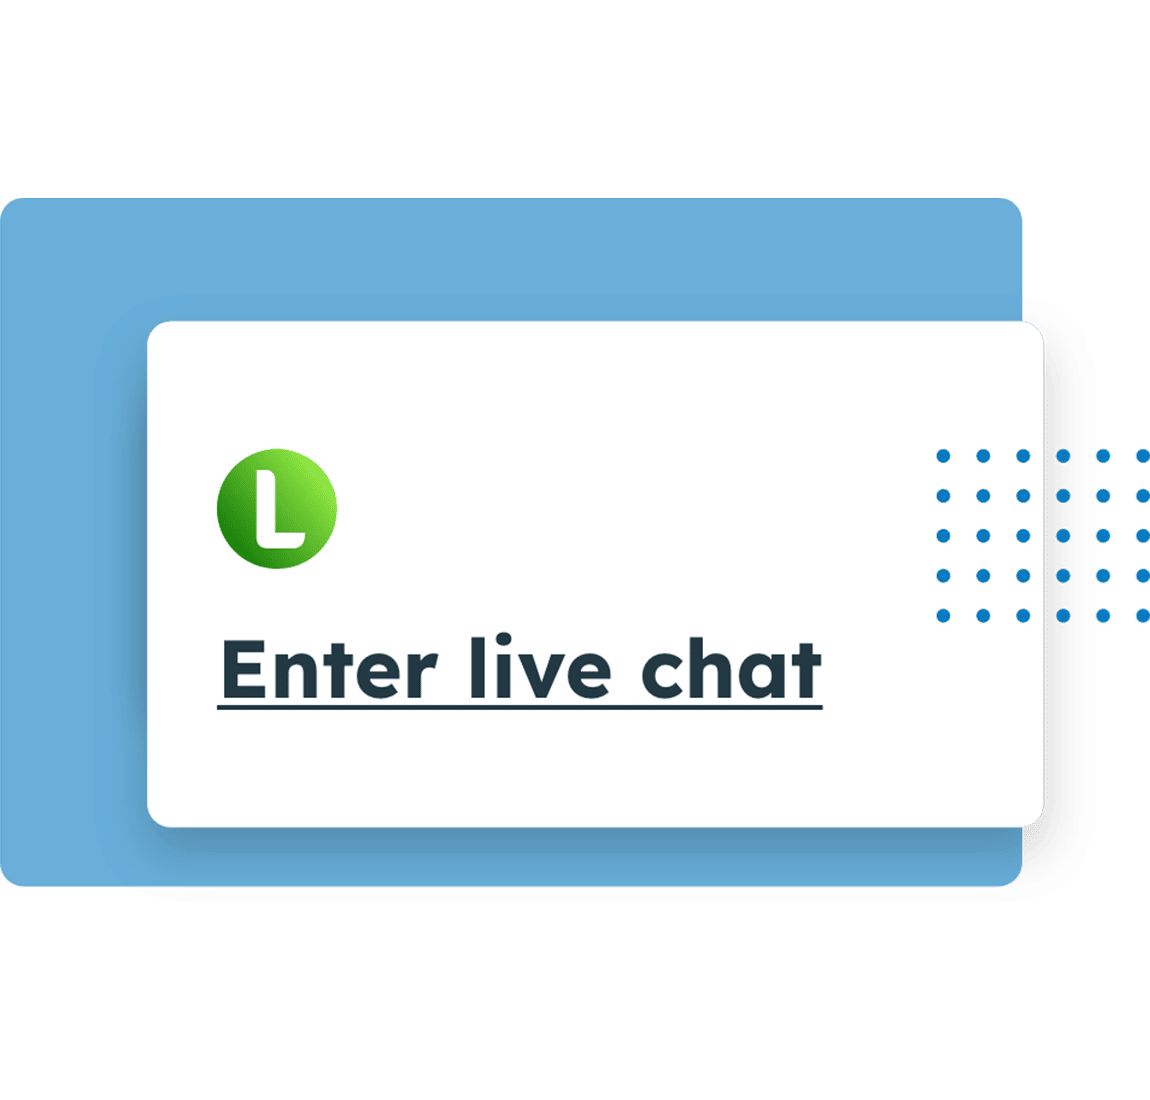 LeanLaw live chat setting.